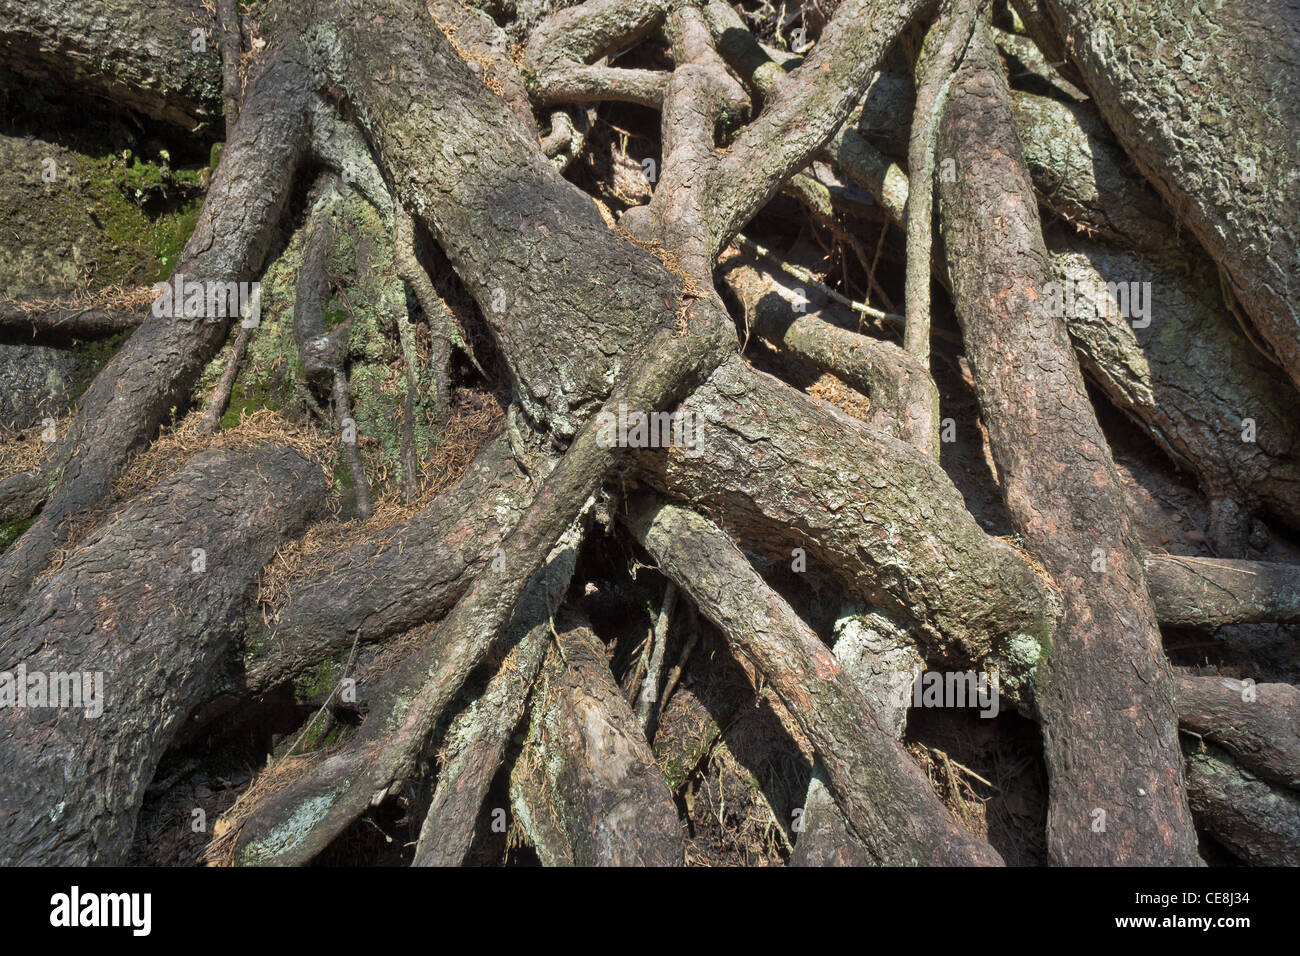 intertwined roots of spruce tree Stock Photo